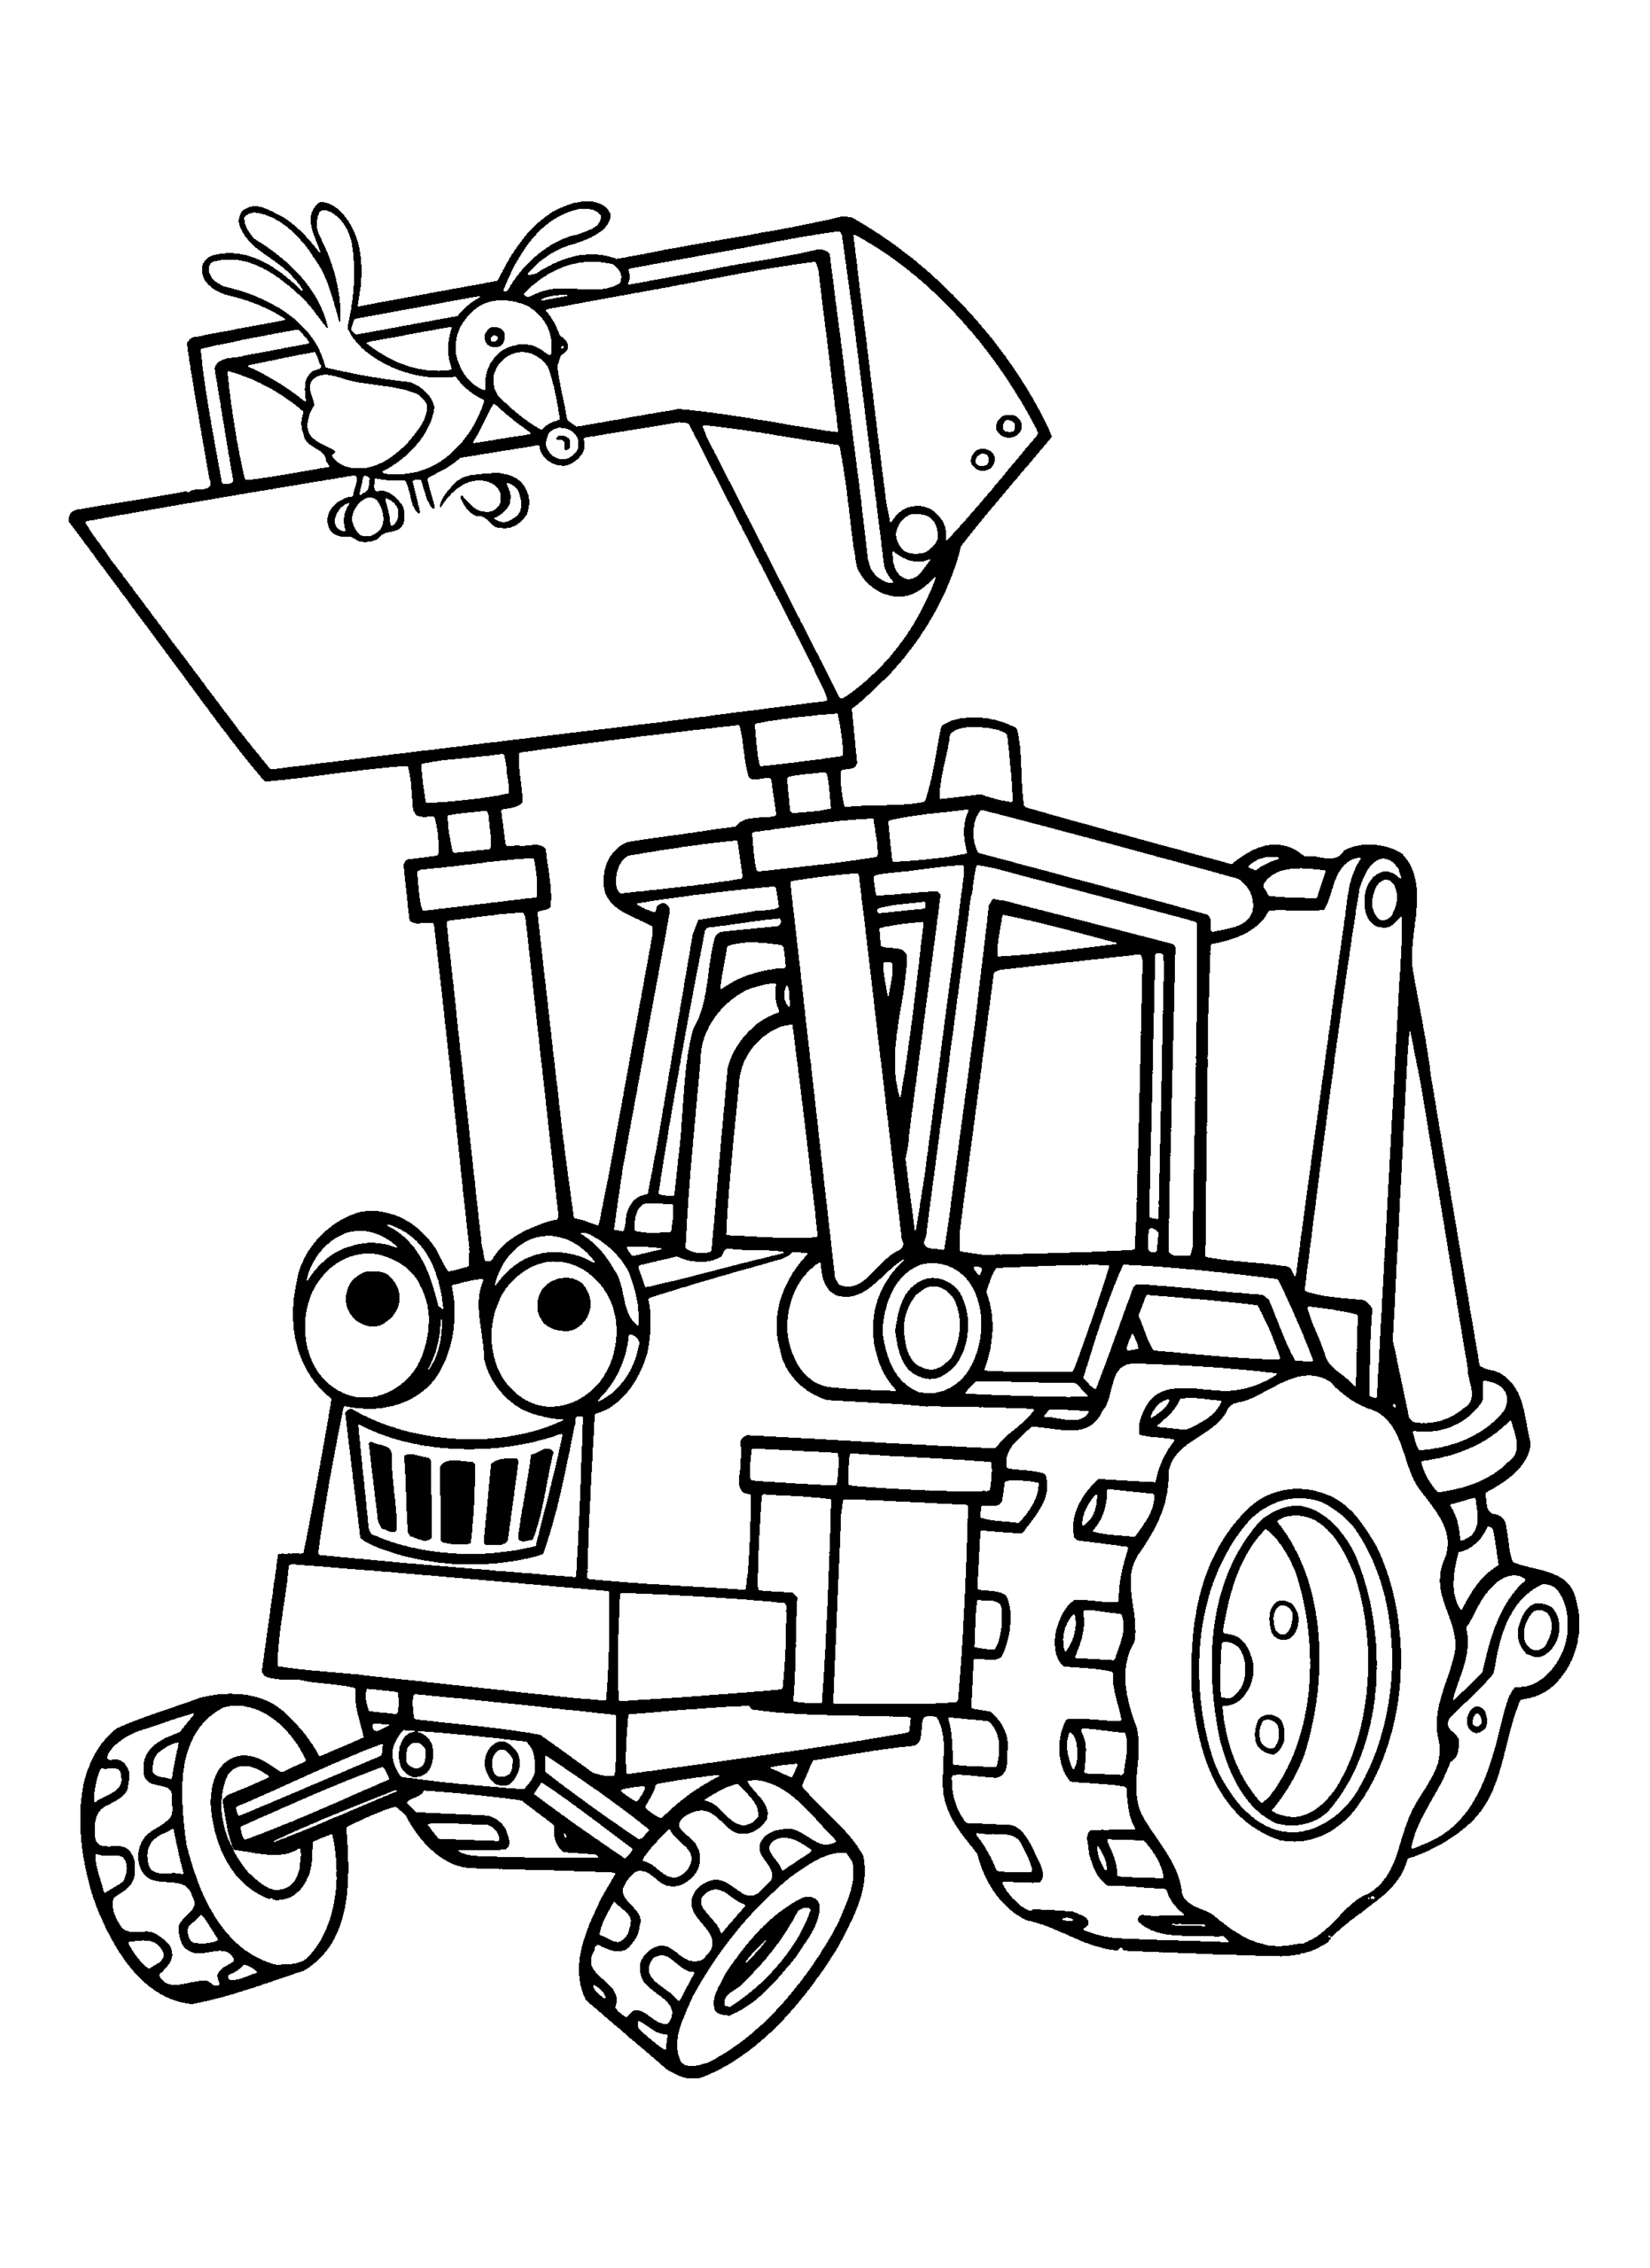 Bob the Builder Coloring Pages TV Film bob the builder 40 Printable 2020 01059 Coloring4free